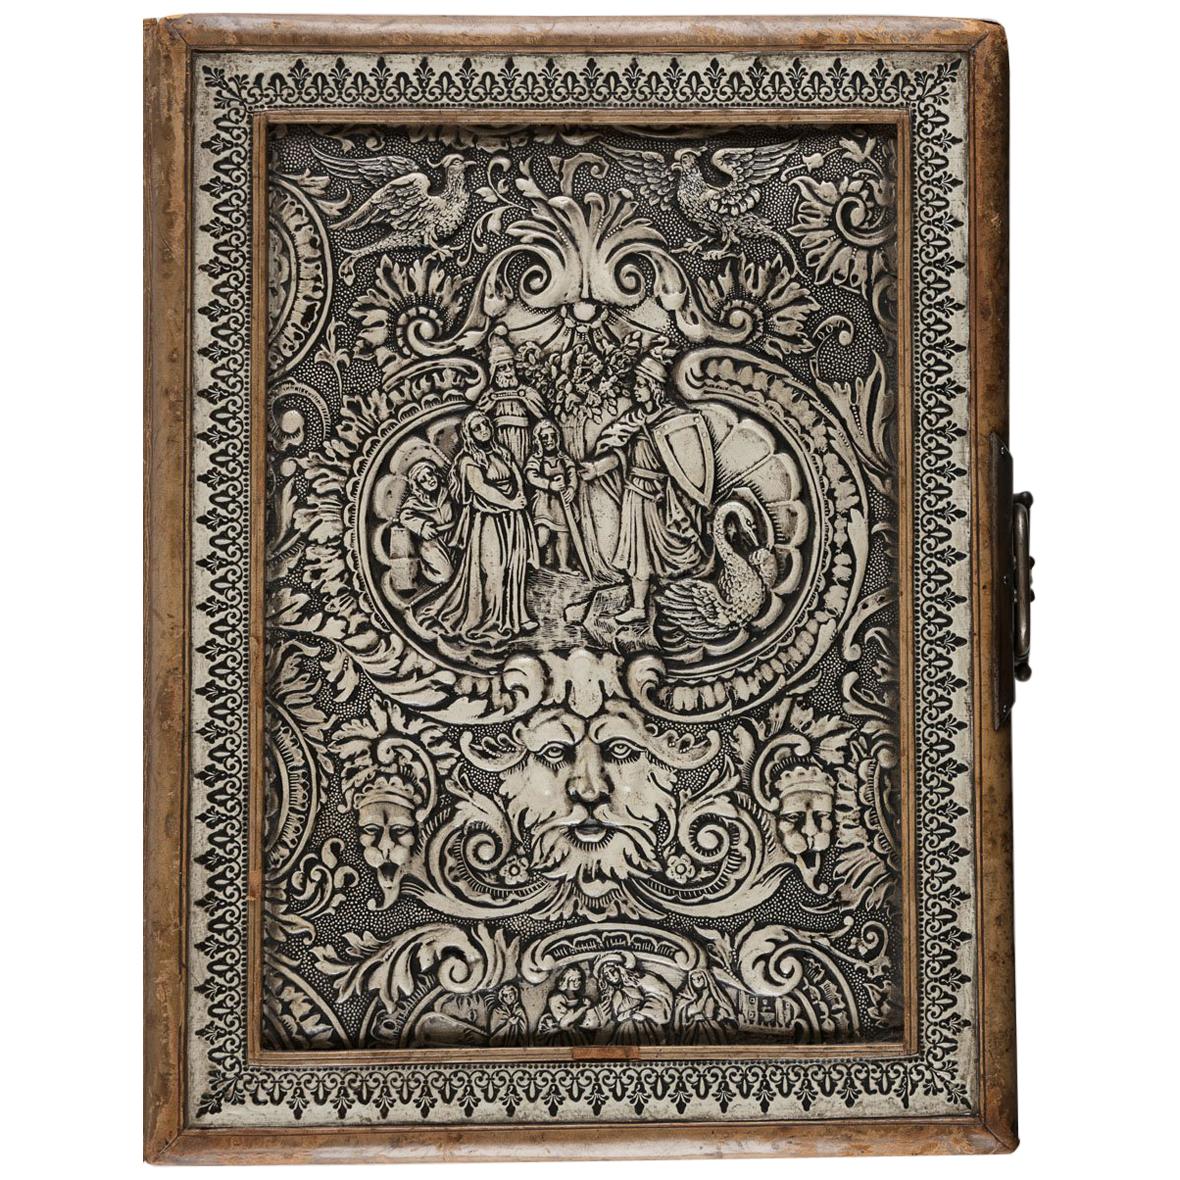 Gothic Ornamented Leather Bound Album for Photographs